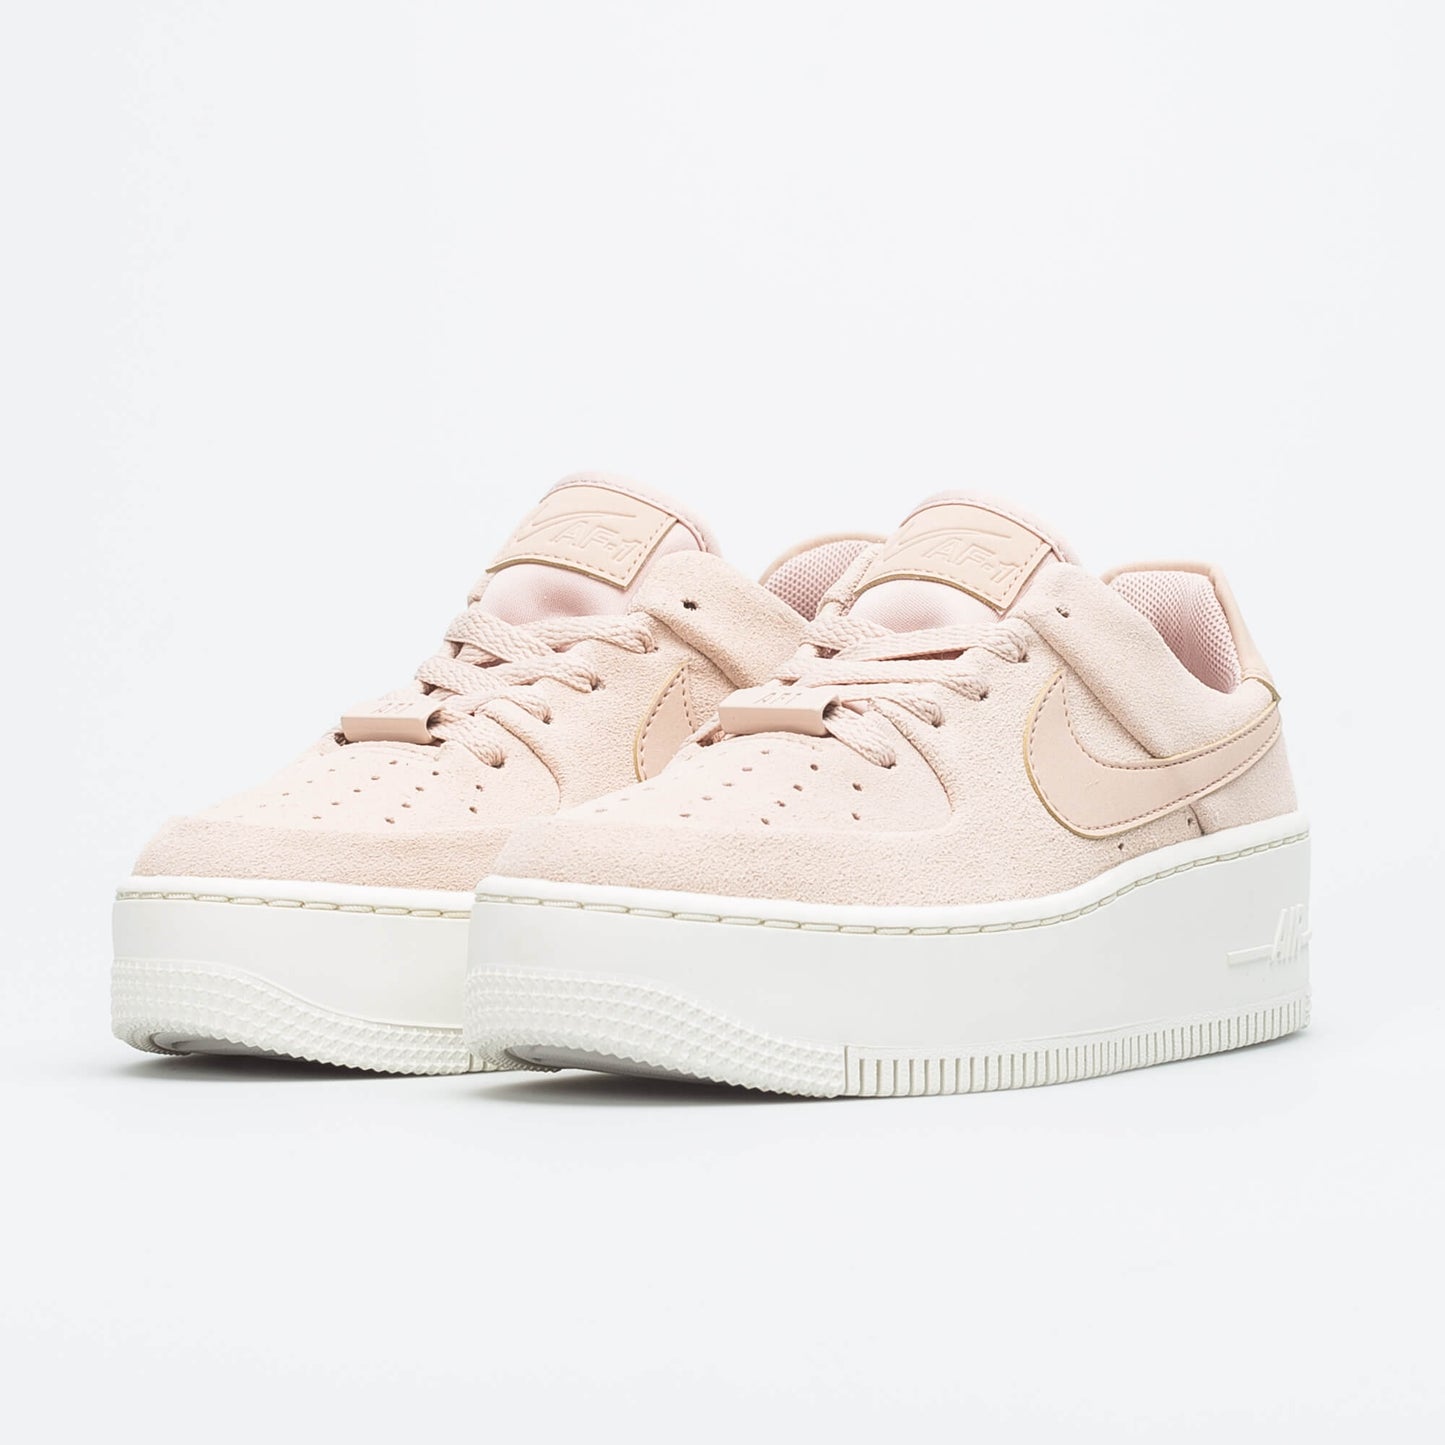 Nike Women's Air Force 1 Sage Low Particle Beige AR5339-201